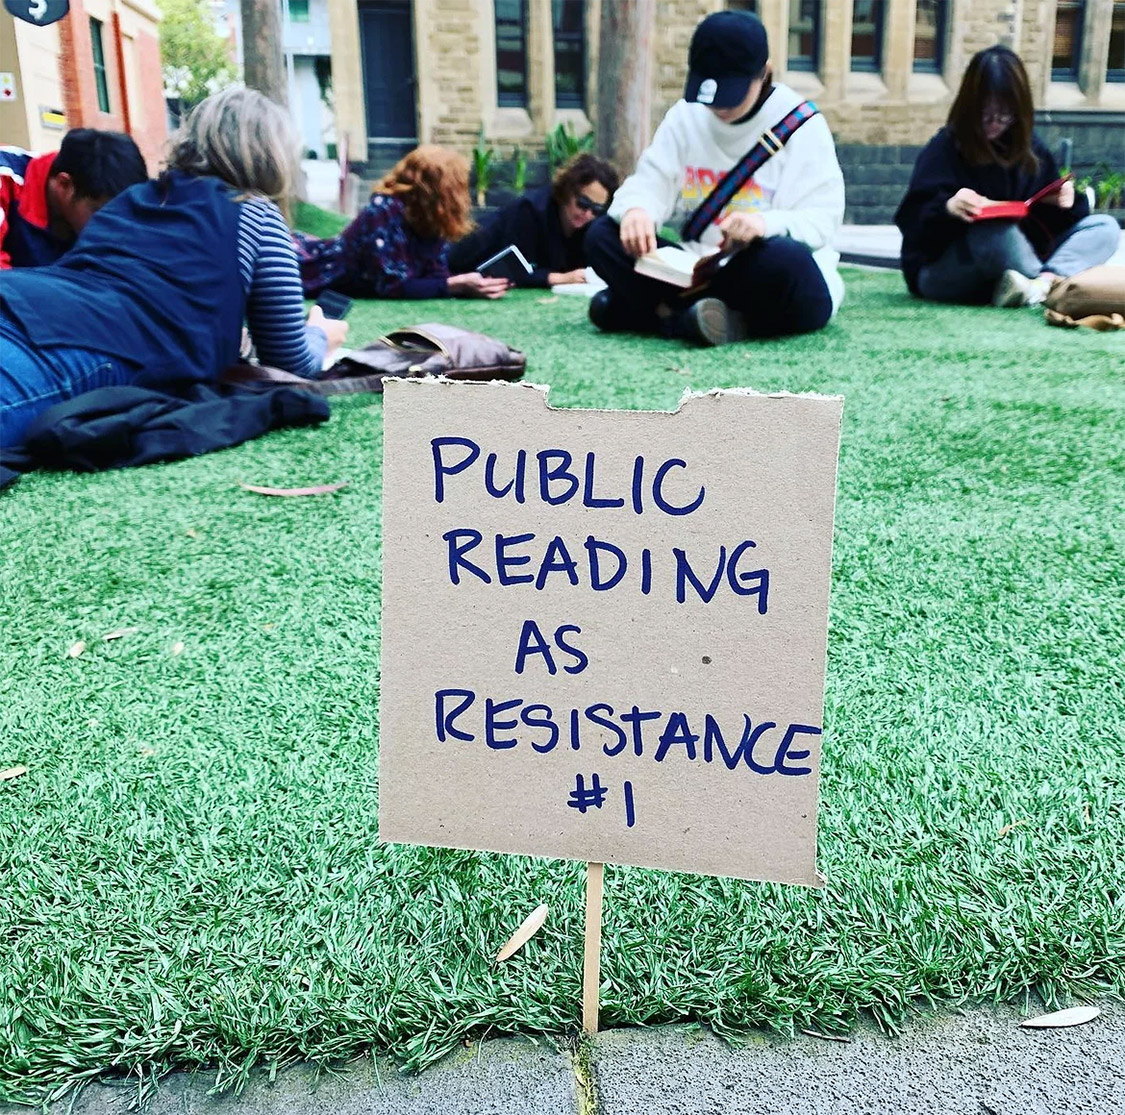 A sign on a grass lawn says public reading as resistance #1.